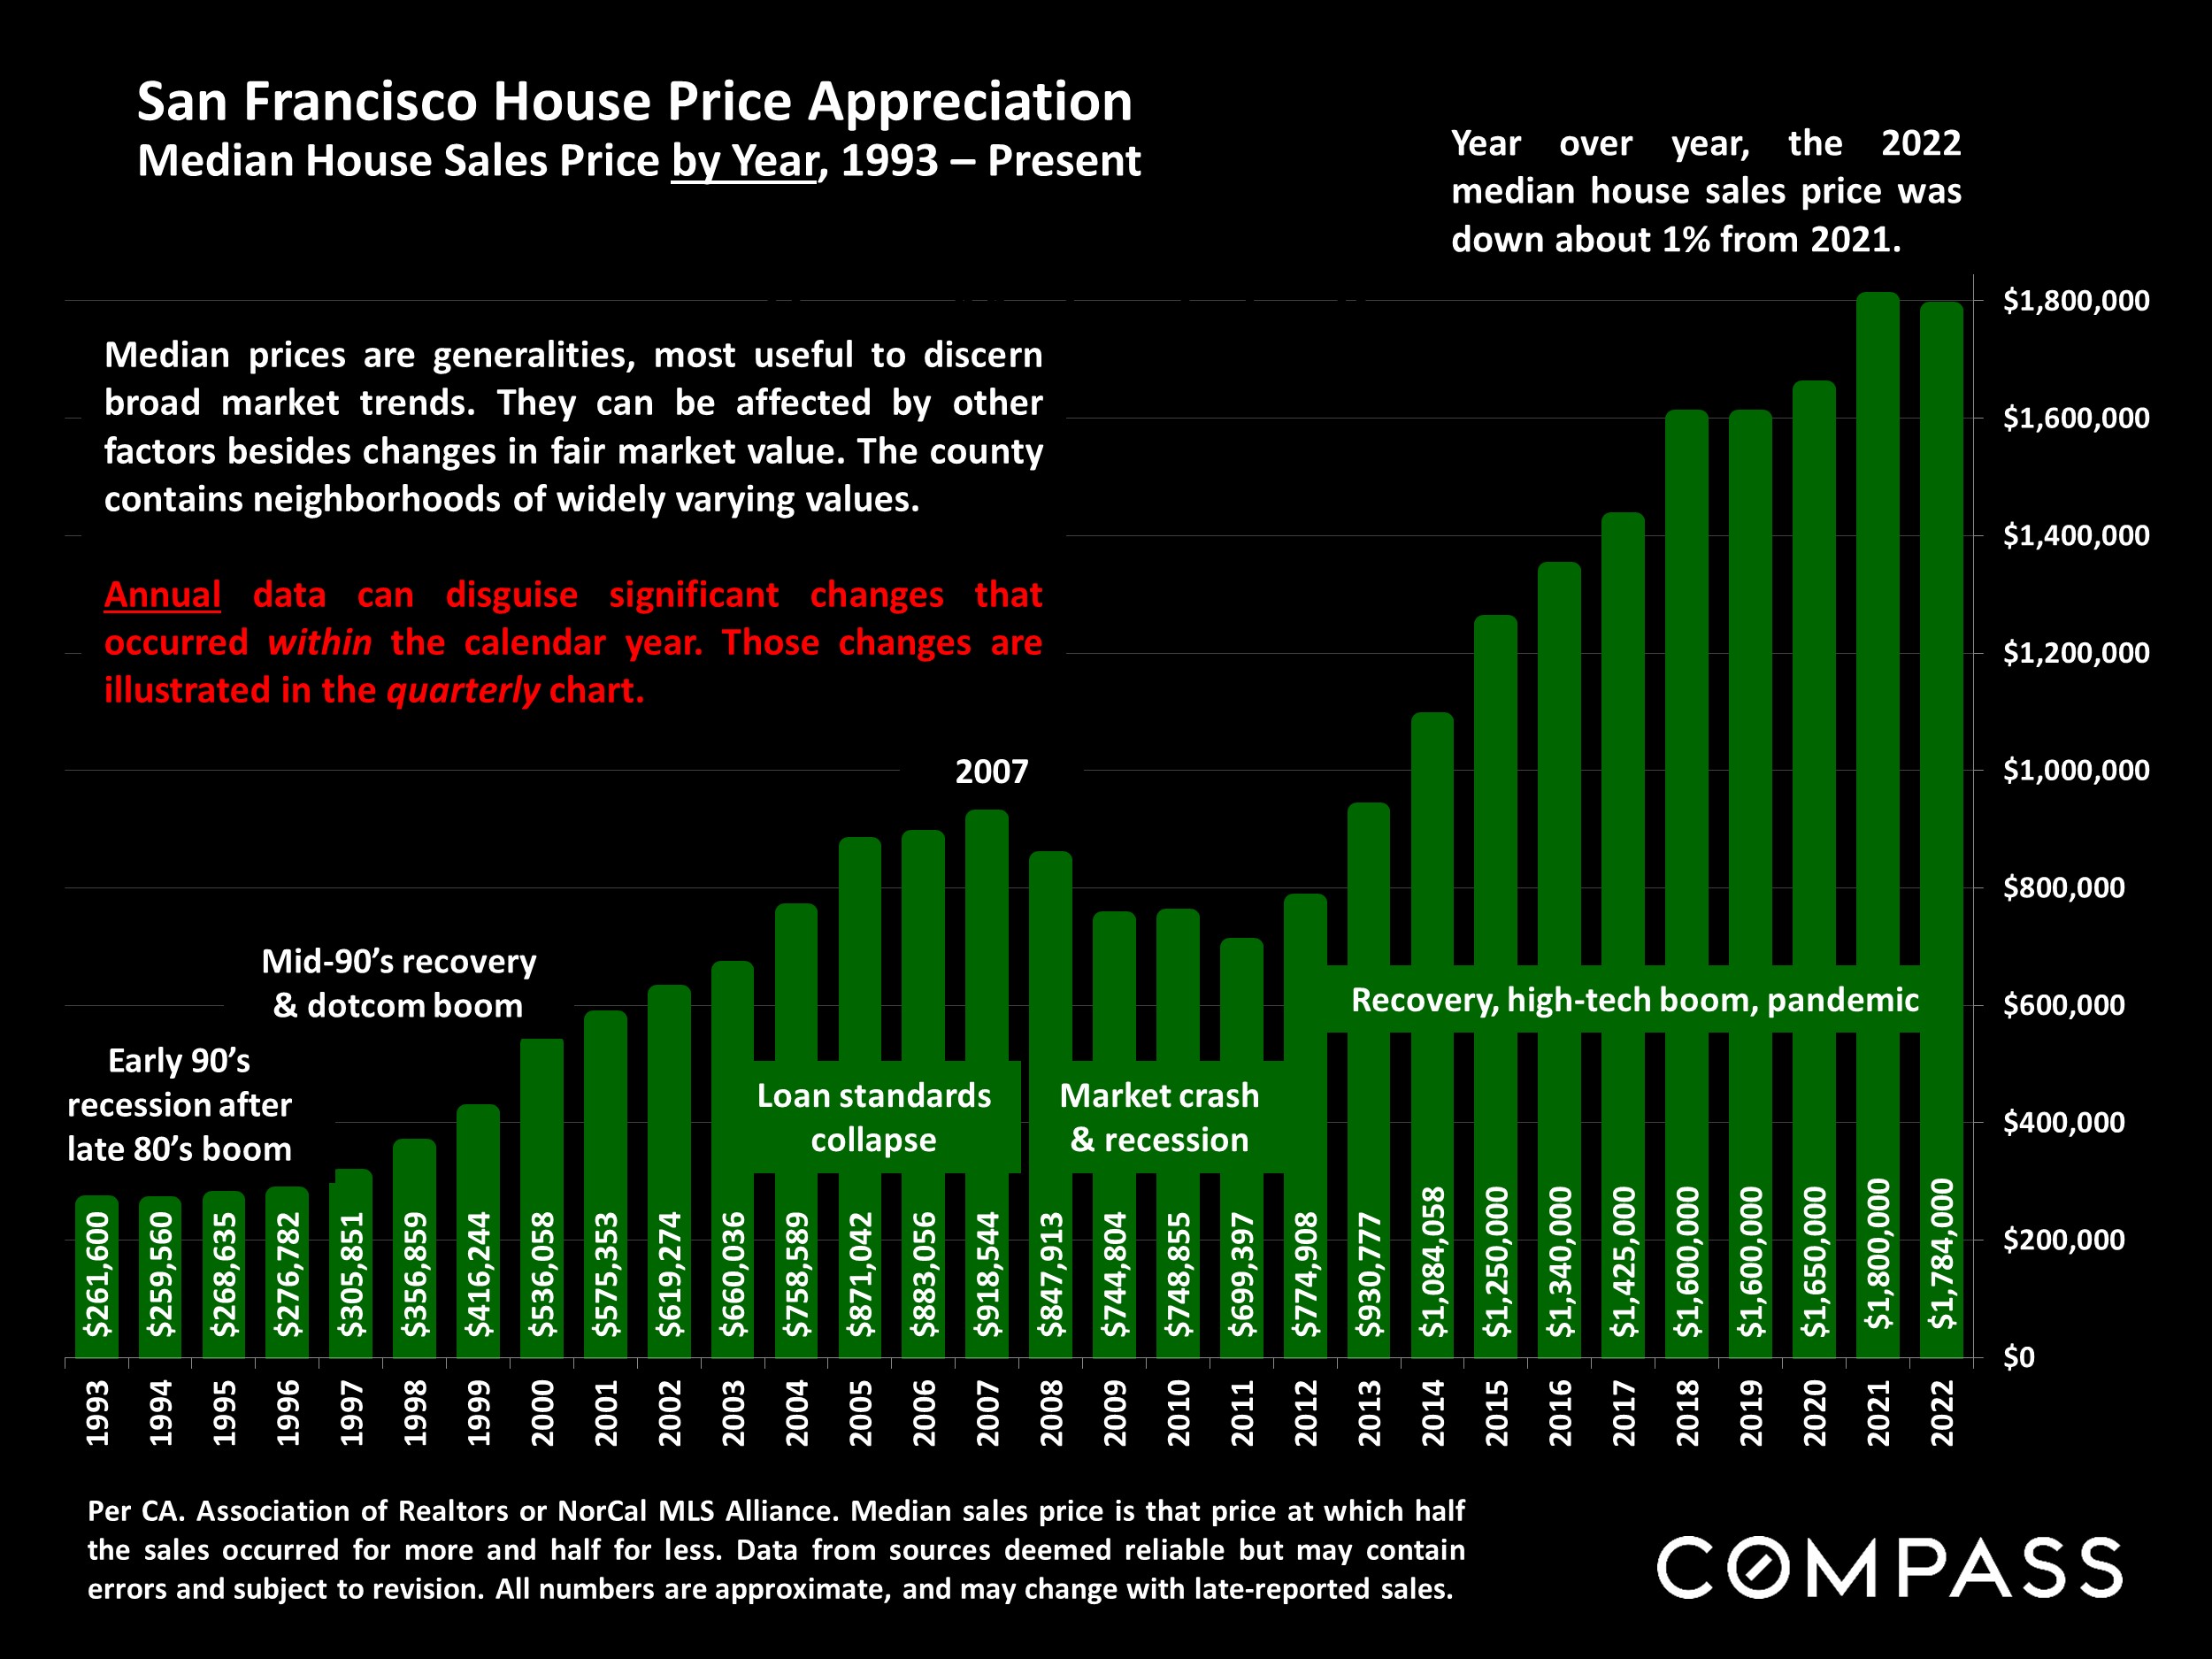 PDF of a chart showing how home prices have appreciated